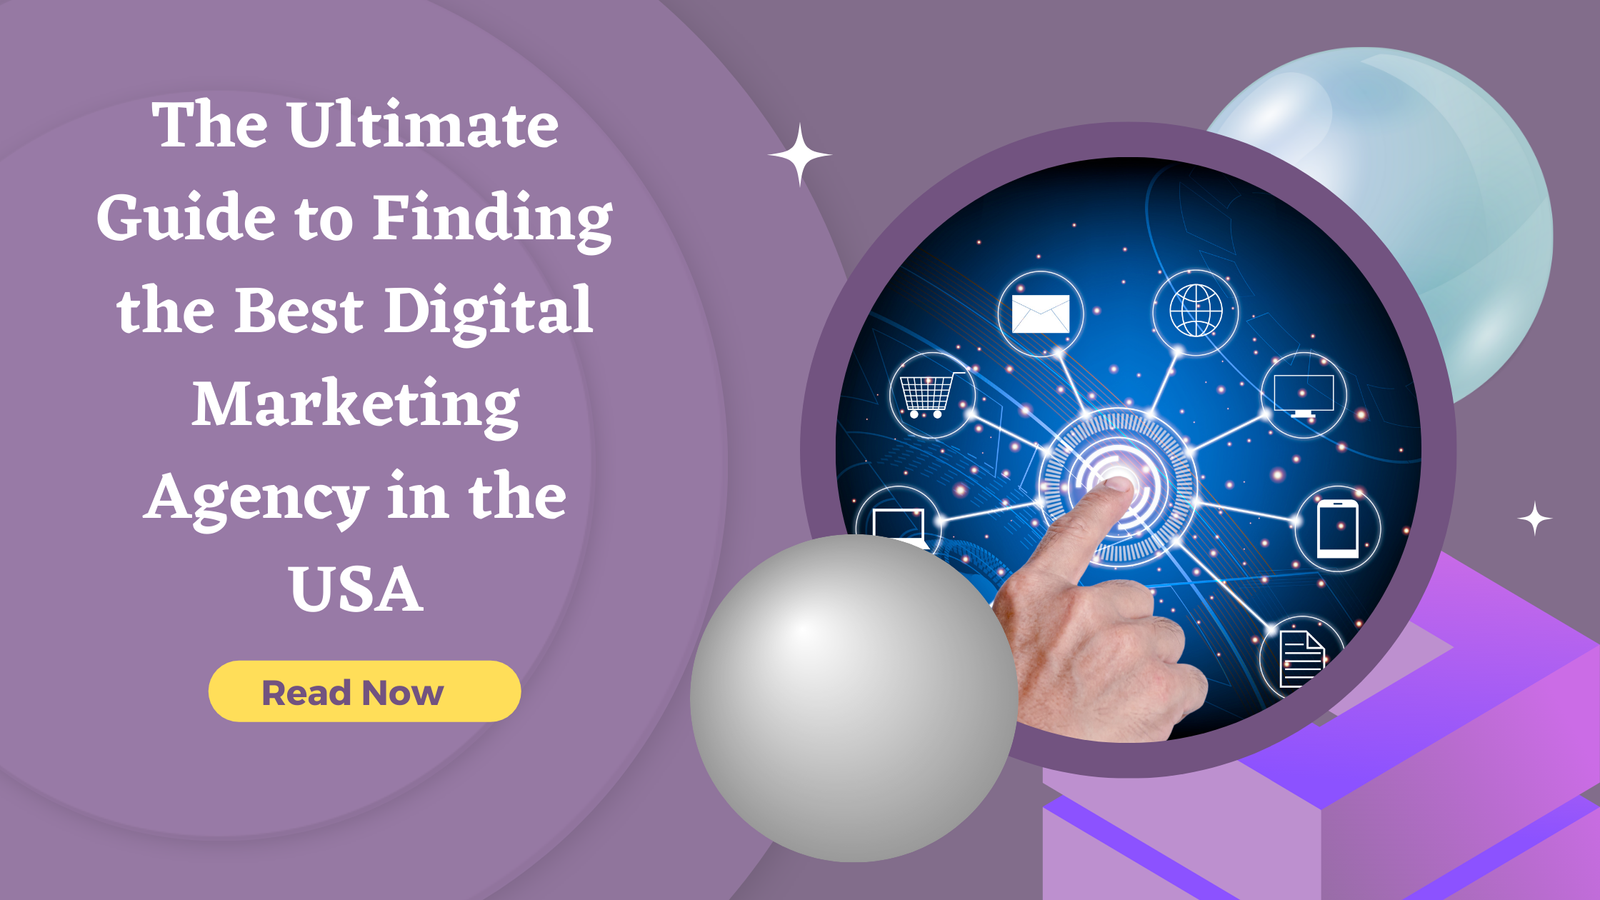 The Ultimate Guide to Finding the Best Digital Marketing Agency in the USA